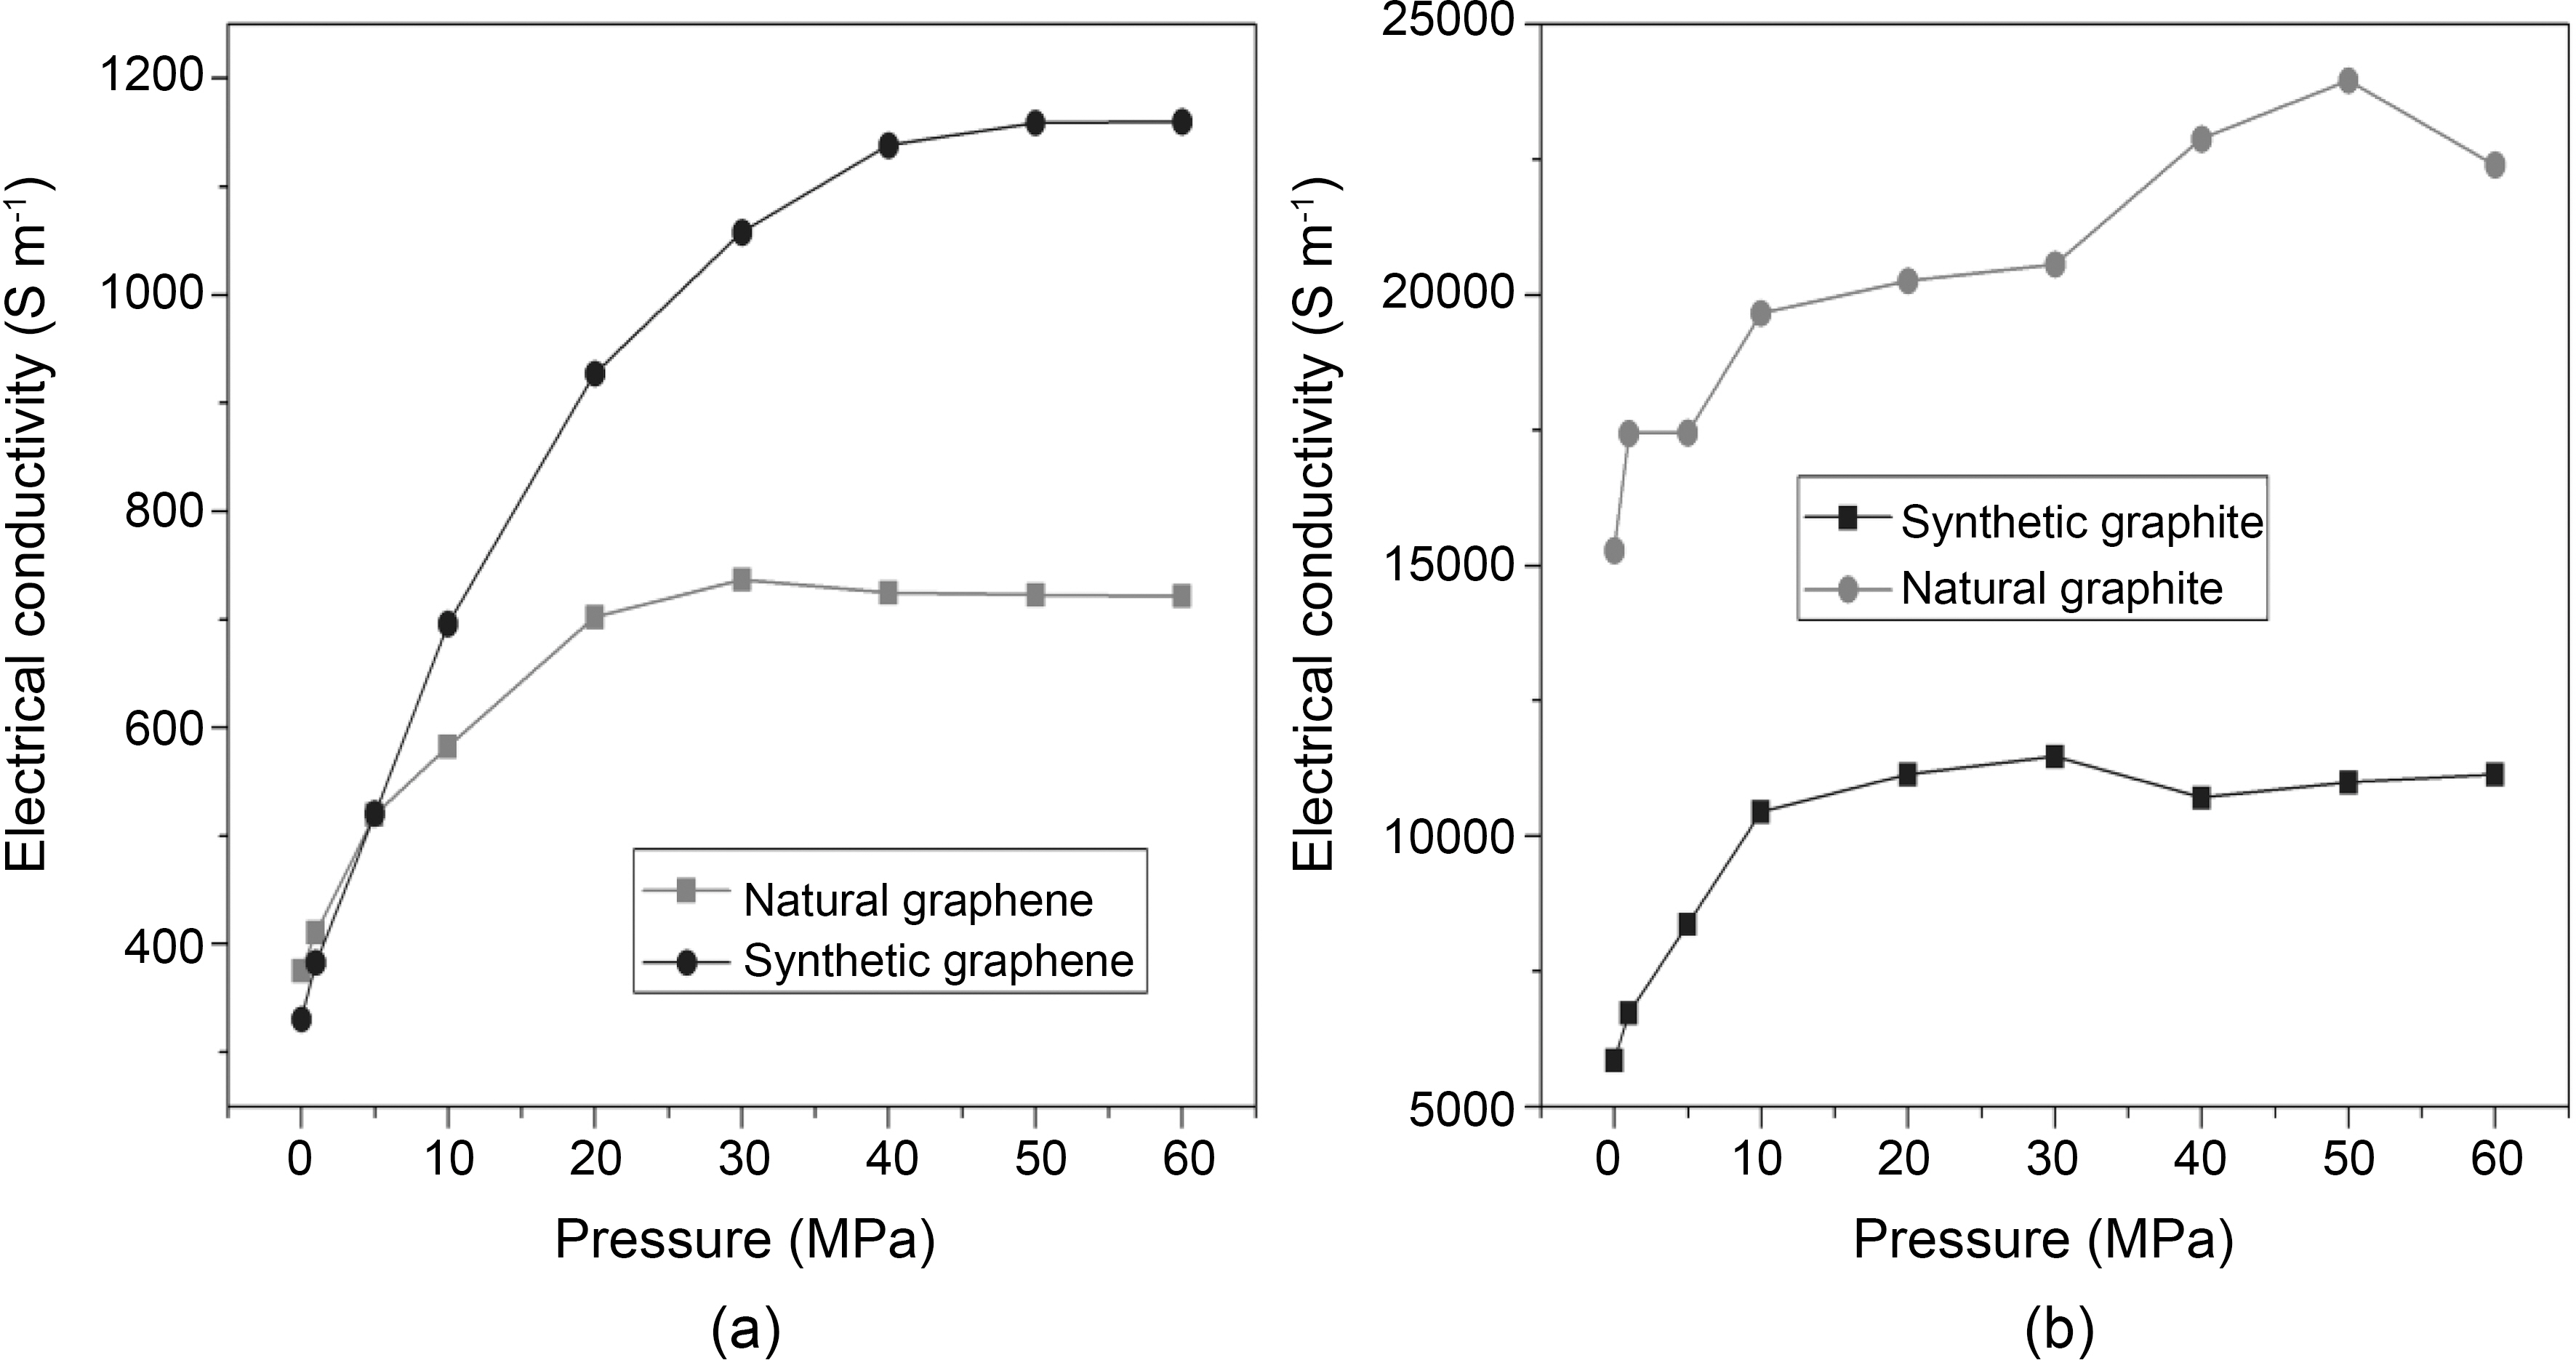 Electrical conductivity versus pressure of (a) natural and synthetic graphene and (b) natural and synthetic graphite.